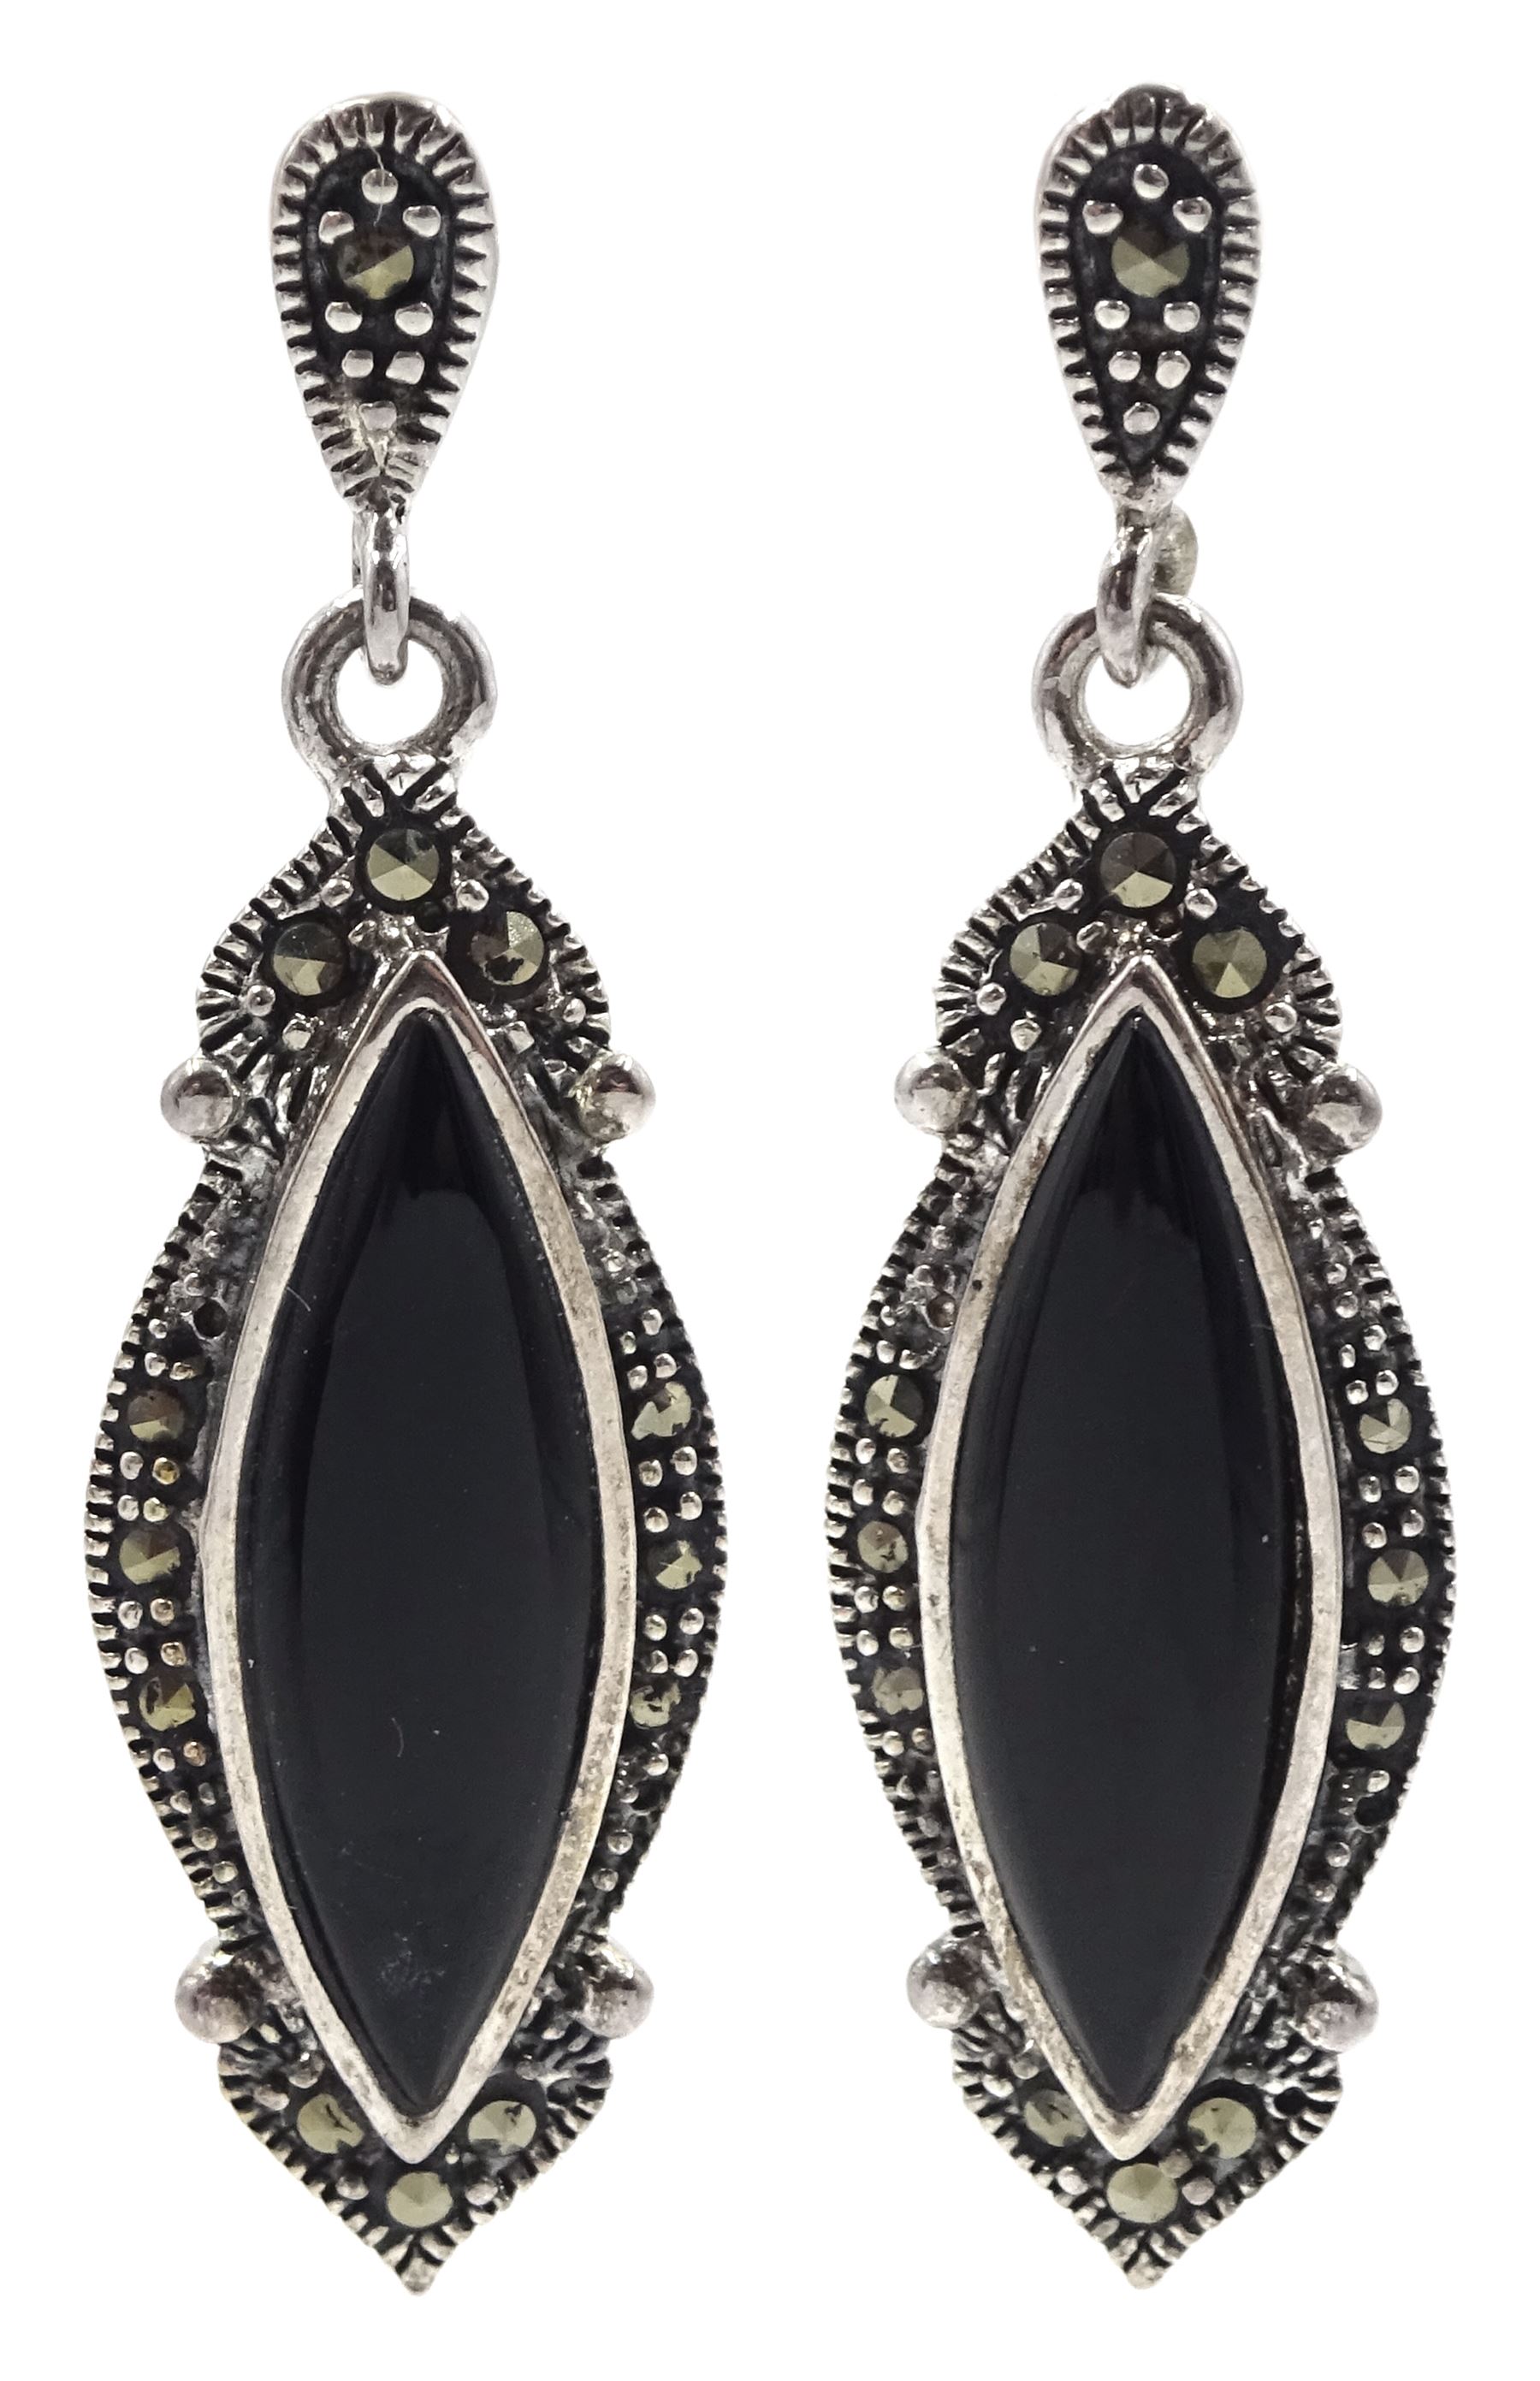 Pair of silver black onyx and marcasite pendant stud earrings